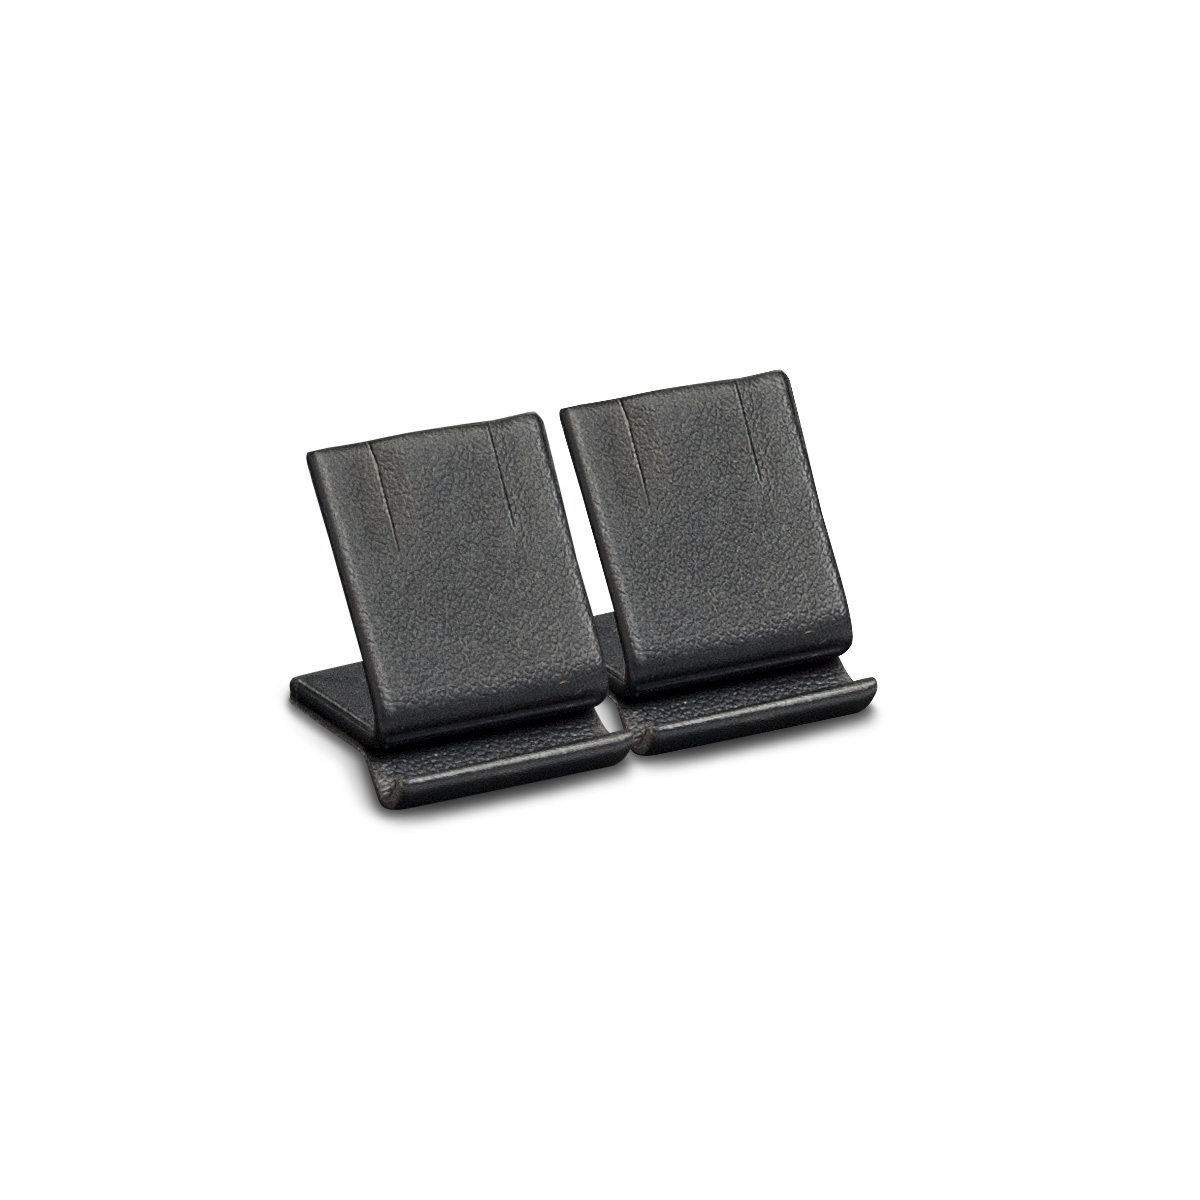 Double presentation display for rings, low, smooth leather imitation, black, LxWxD ca. 3,0 x 4,5 x 3,0 cm